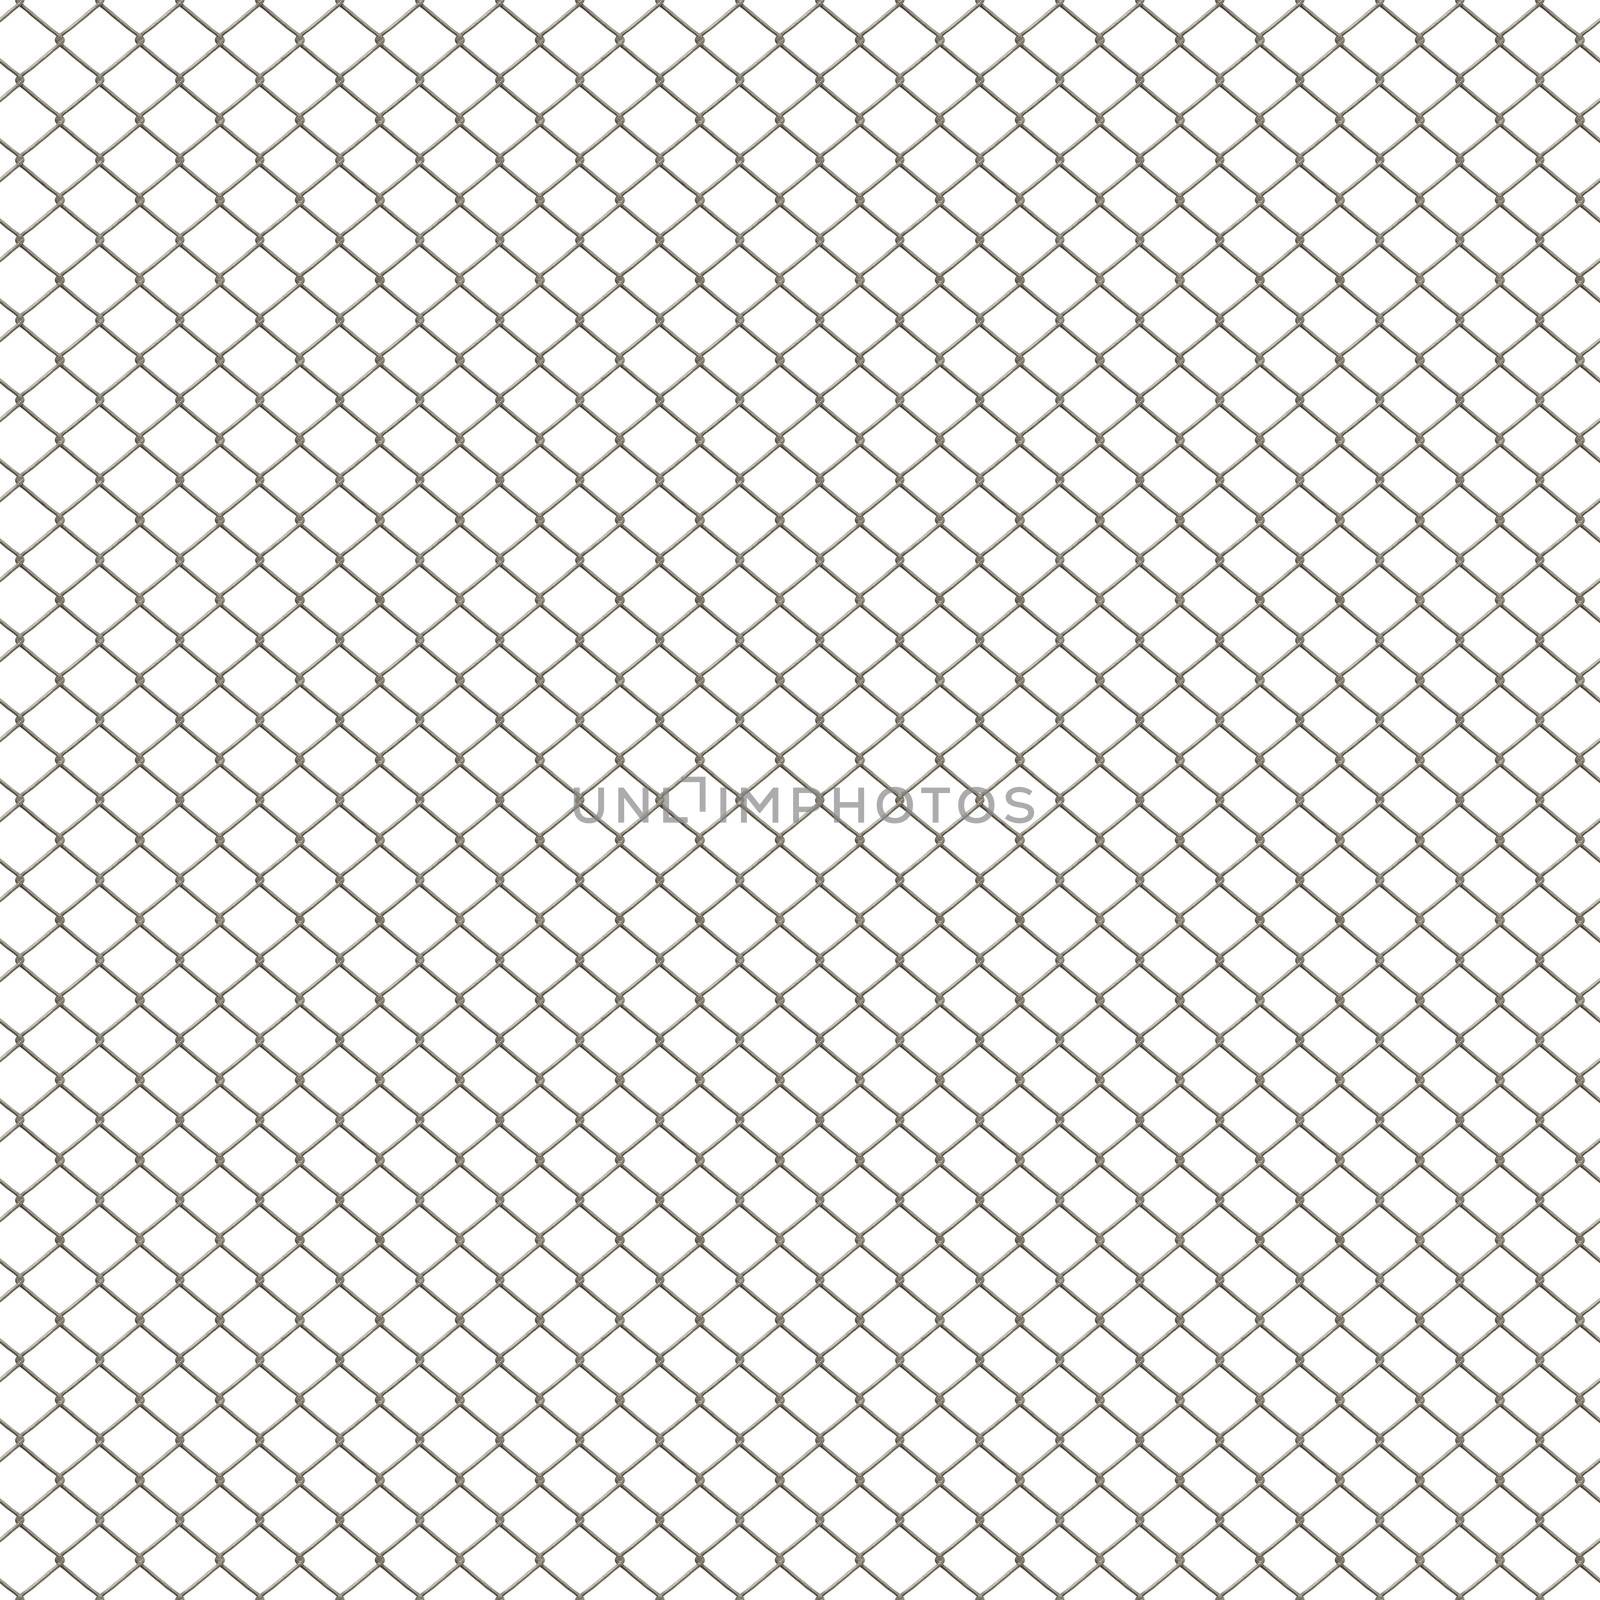 A 3D chain link fence texture isolated over white.  This tiles seamlessly as a pattern in any direction.